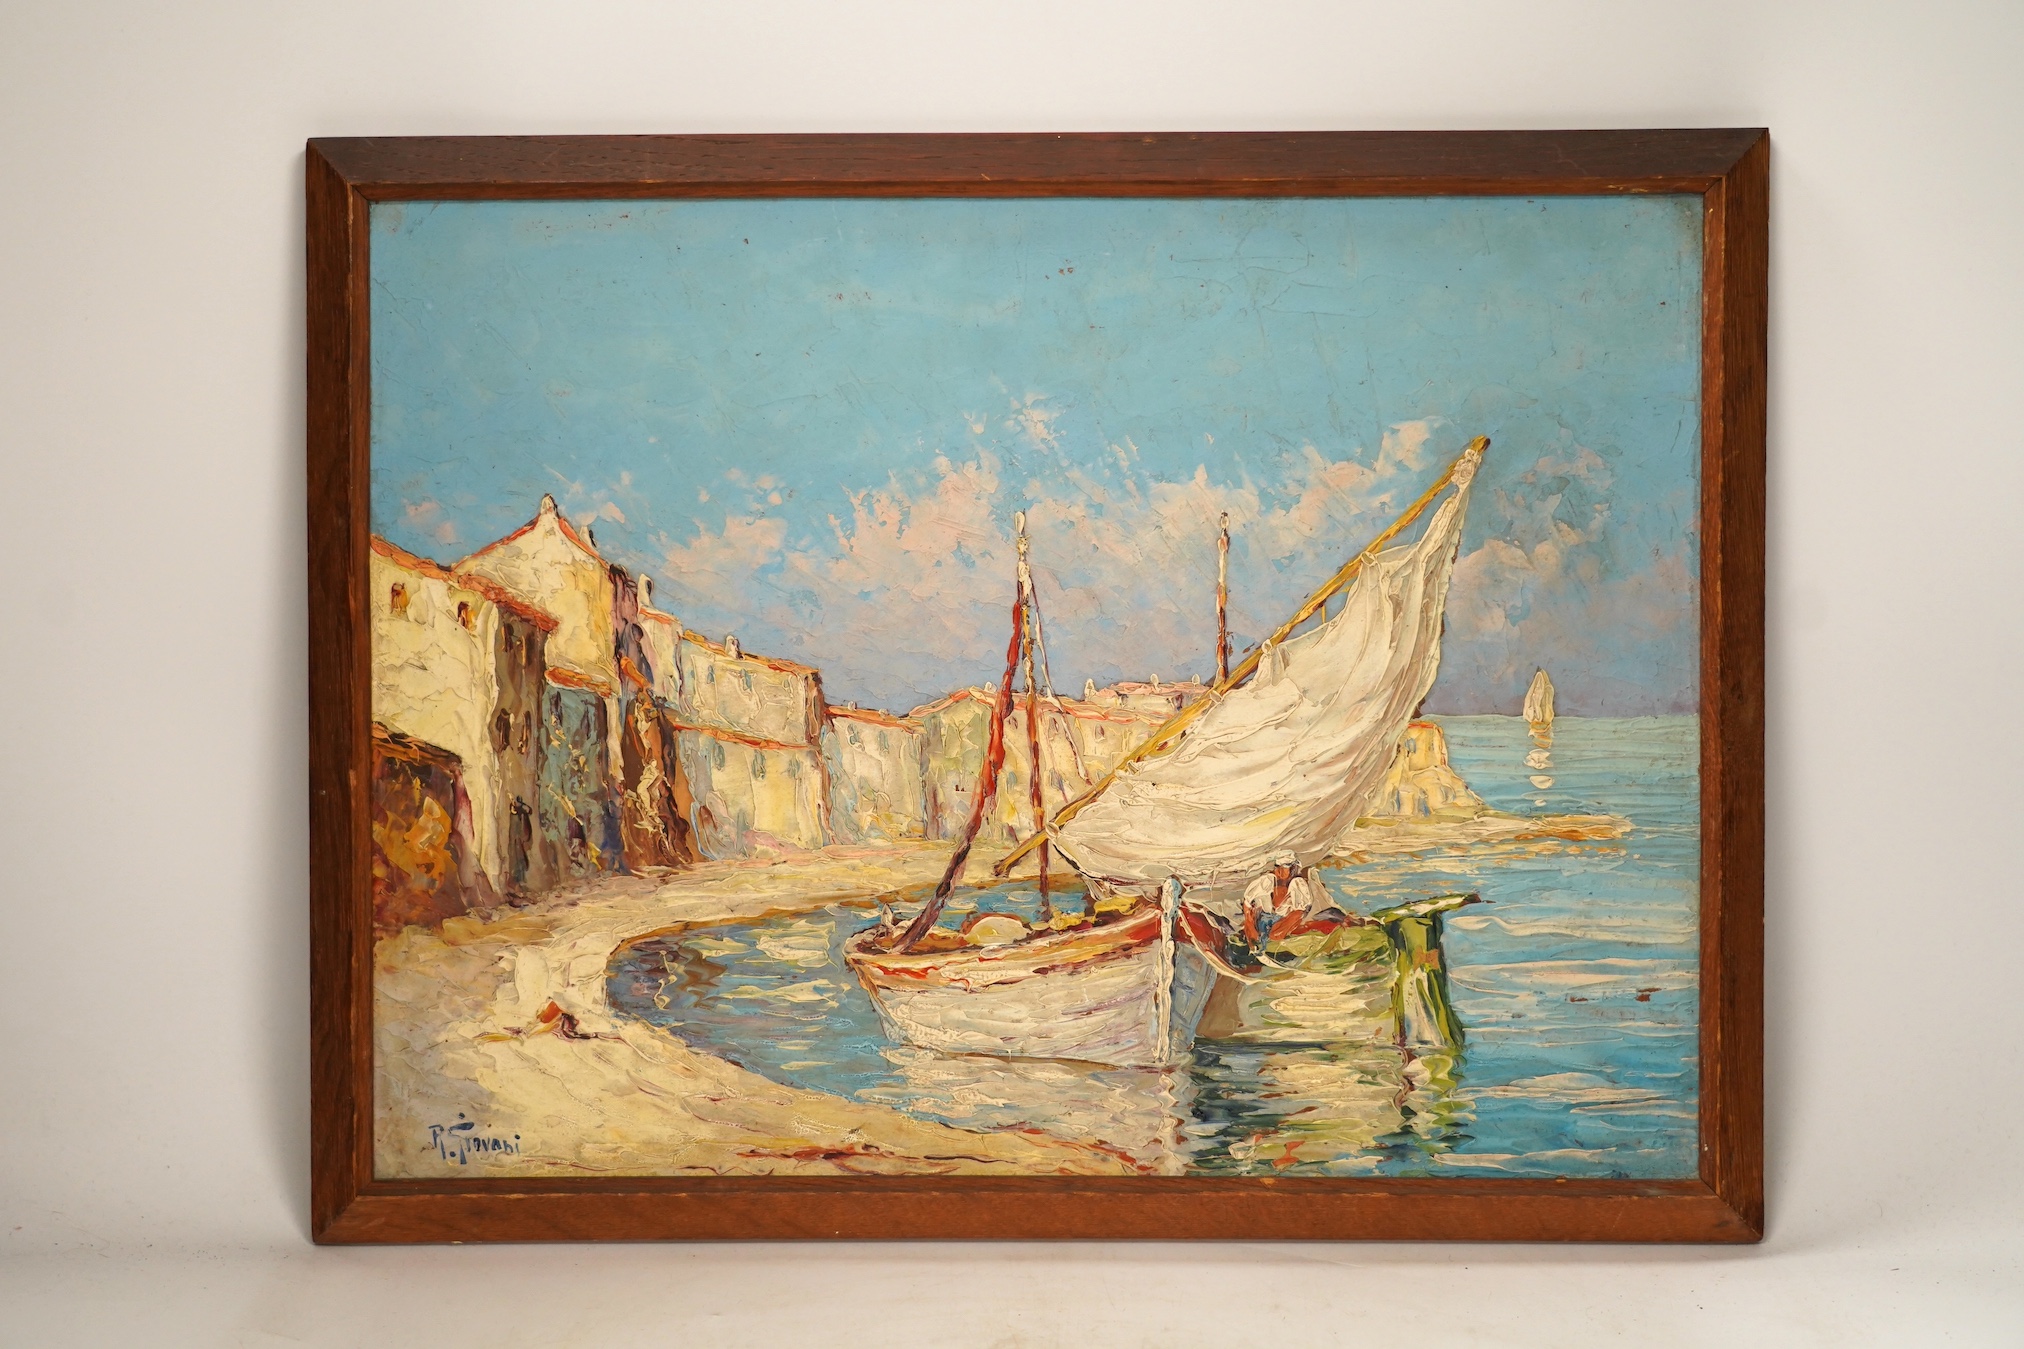 Robert Giovanni (20th. C), impasto oil on board, Continental coastal view with moored boats, signed, 29 x 39cm. Condition - poor to fair, some paint chips and surface dirt